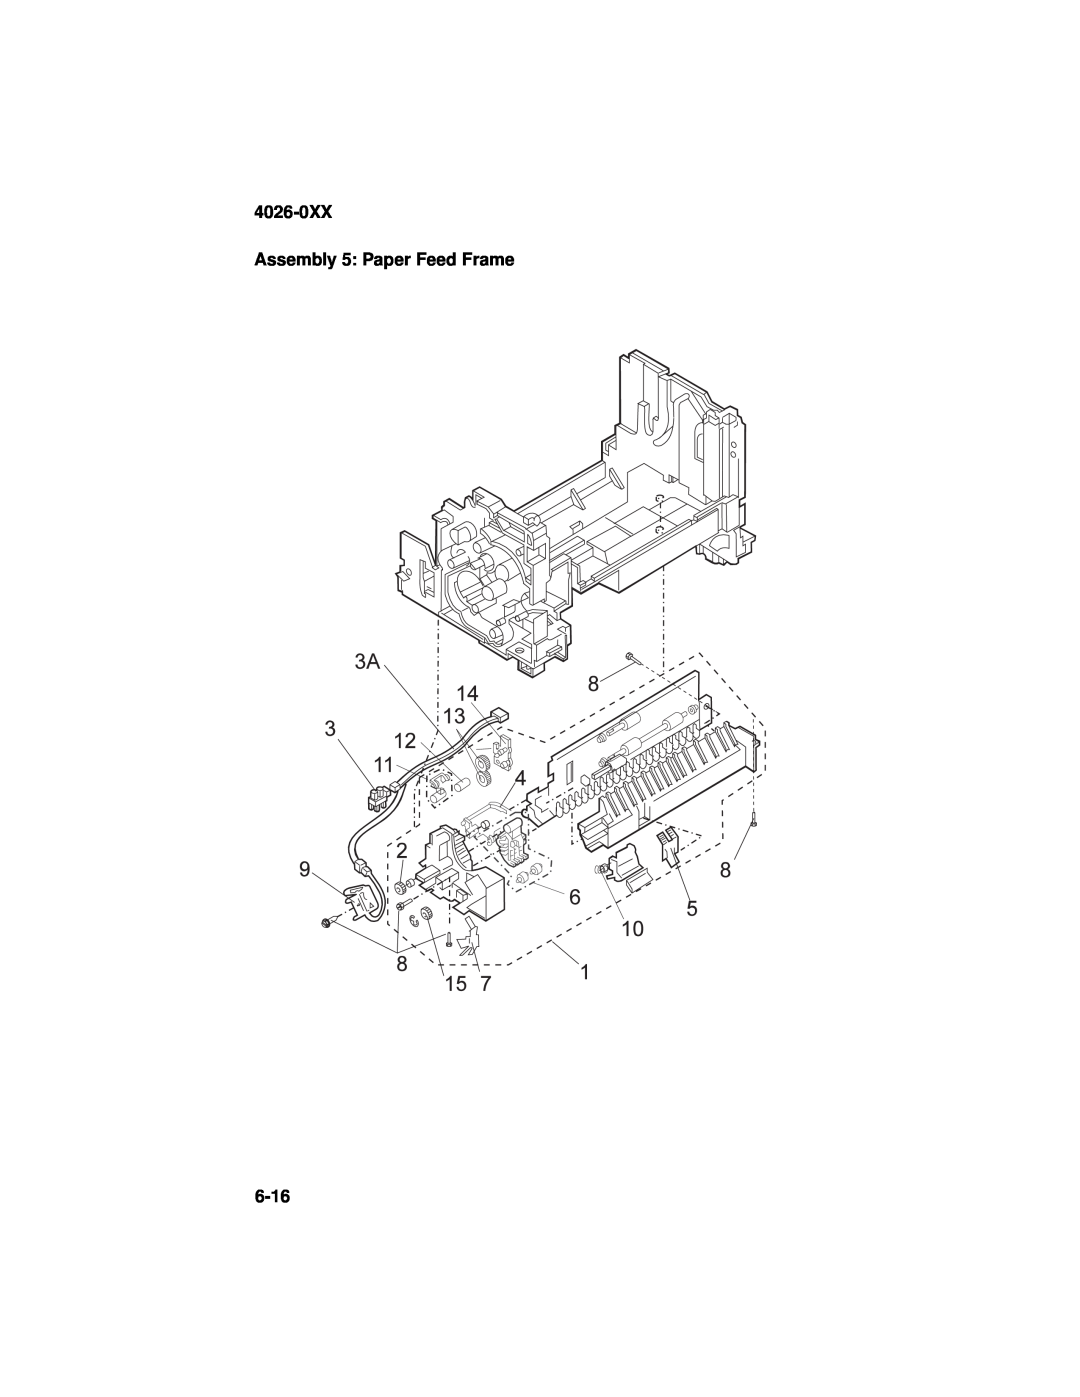 Lexmark manual 4026-0XX Assembly 5: Paper Feed Frame, 6-16 